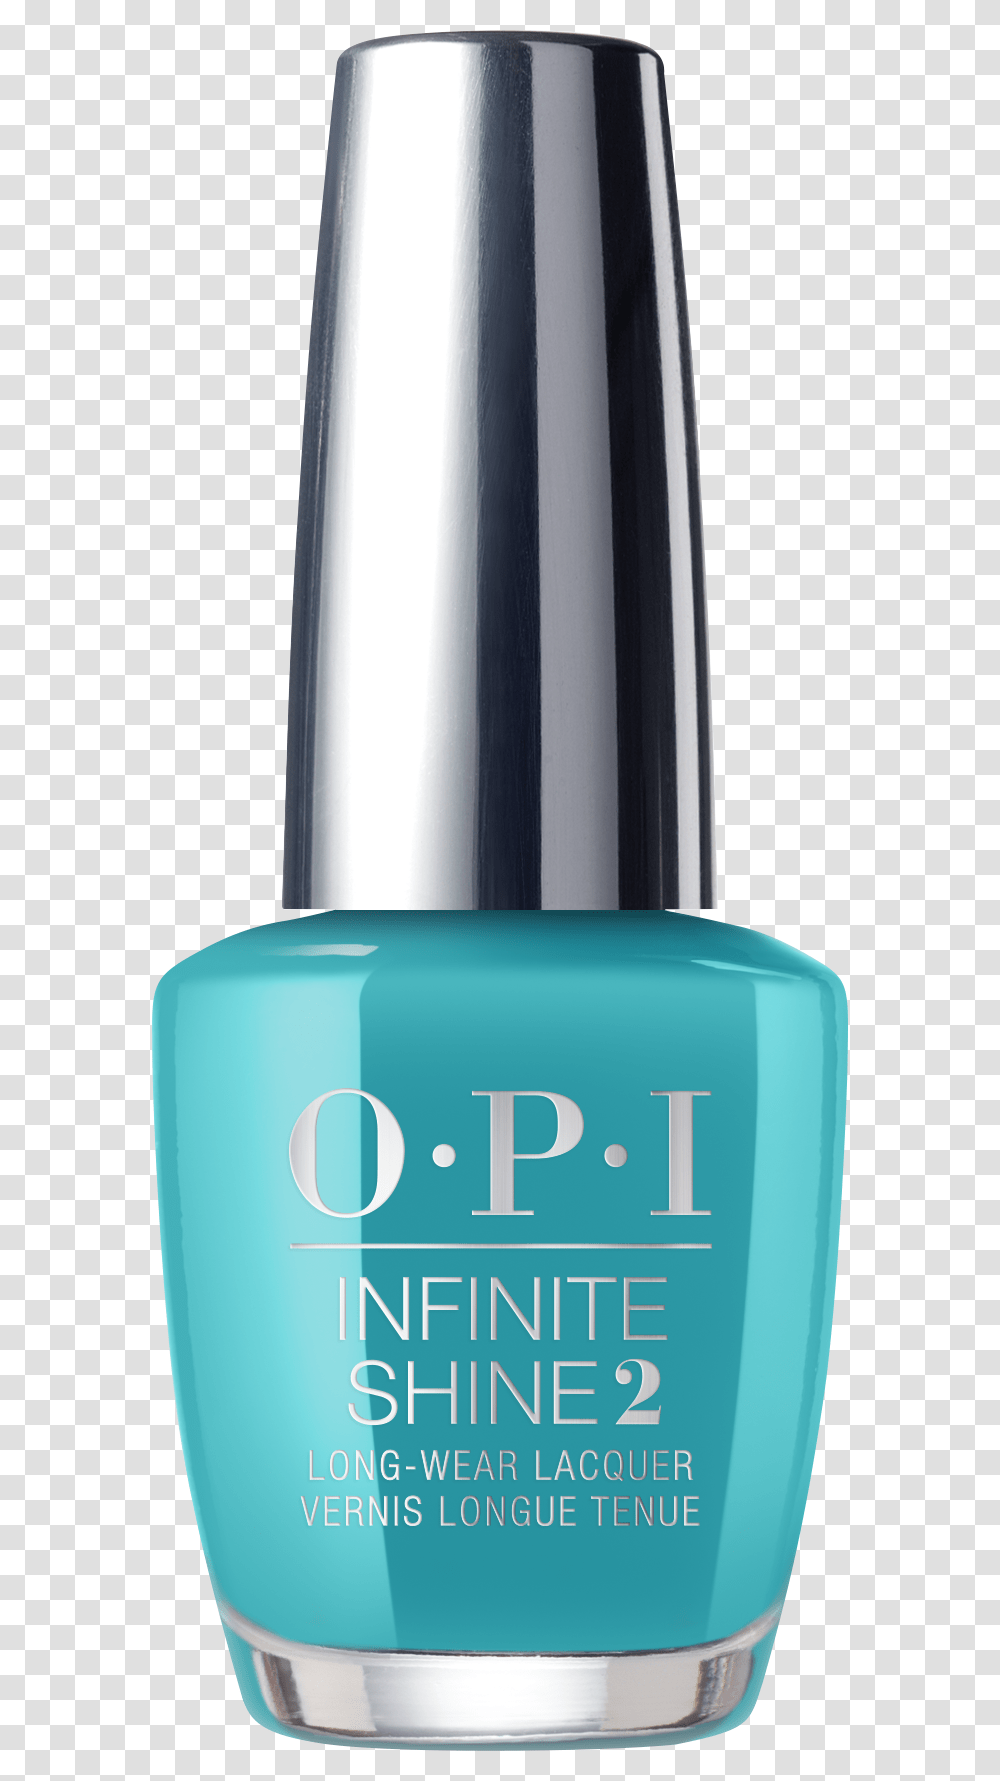 Opi Infinite Shine Can't Find My Czechbook, Cosmetics, Bottle, Perfume, Label Transparent Png